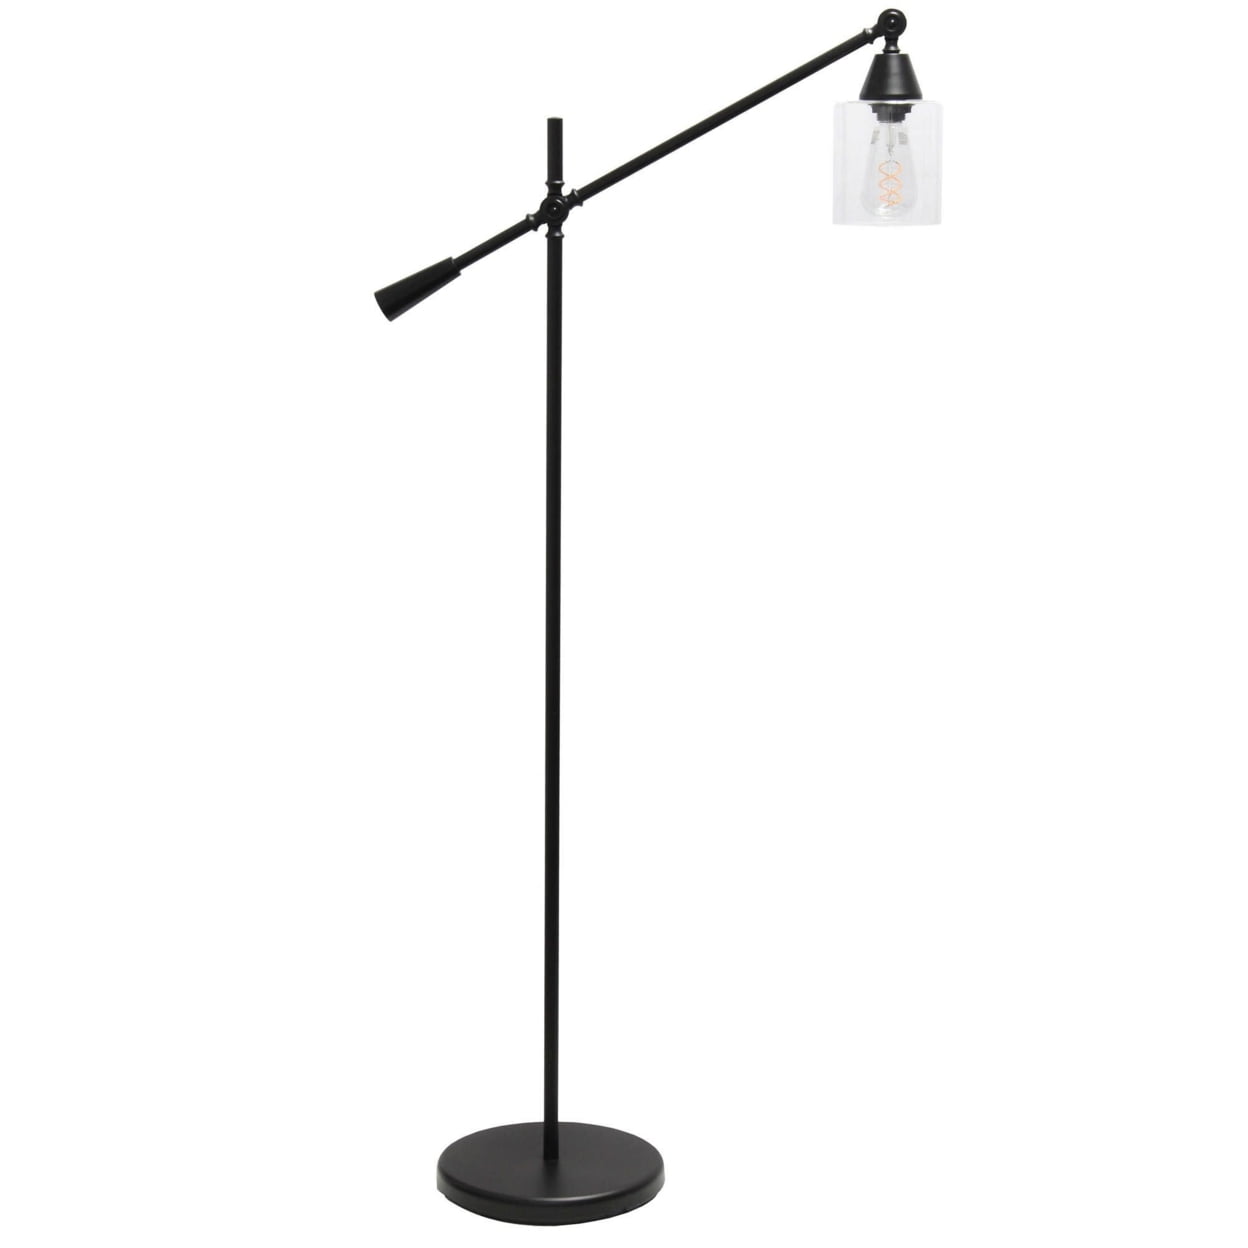 Picture of Elegant Designs Pivot Arm Floor Lamp with Glass Shade